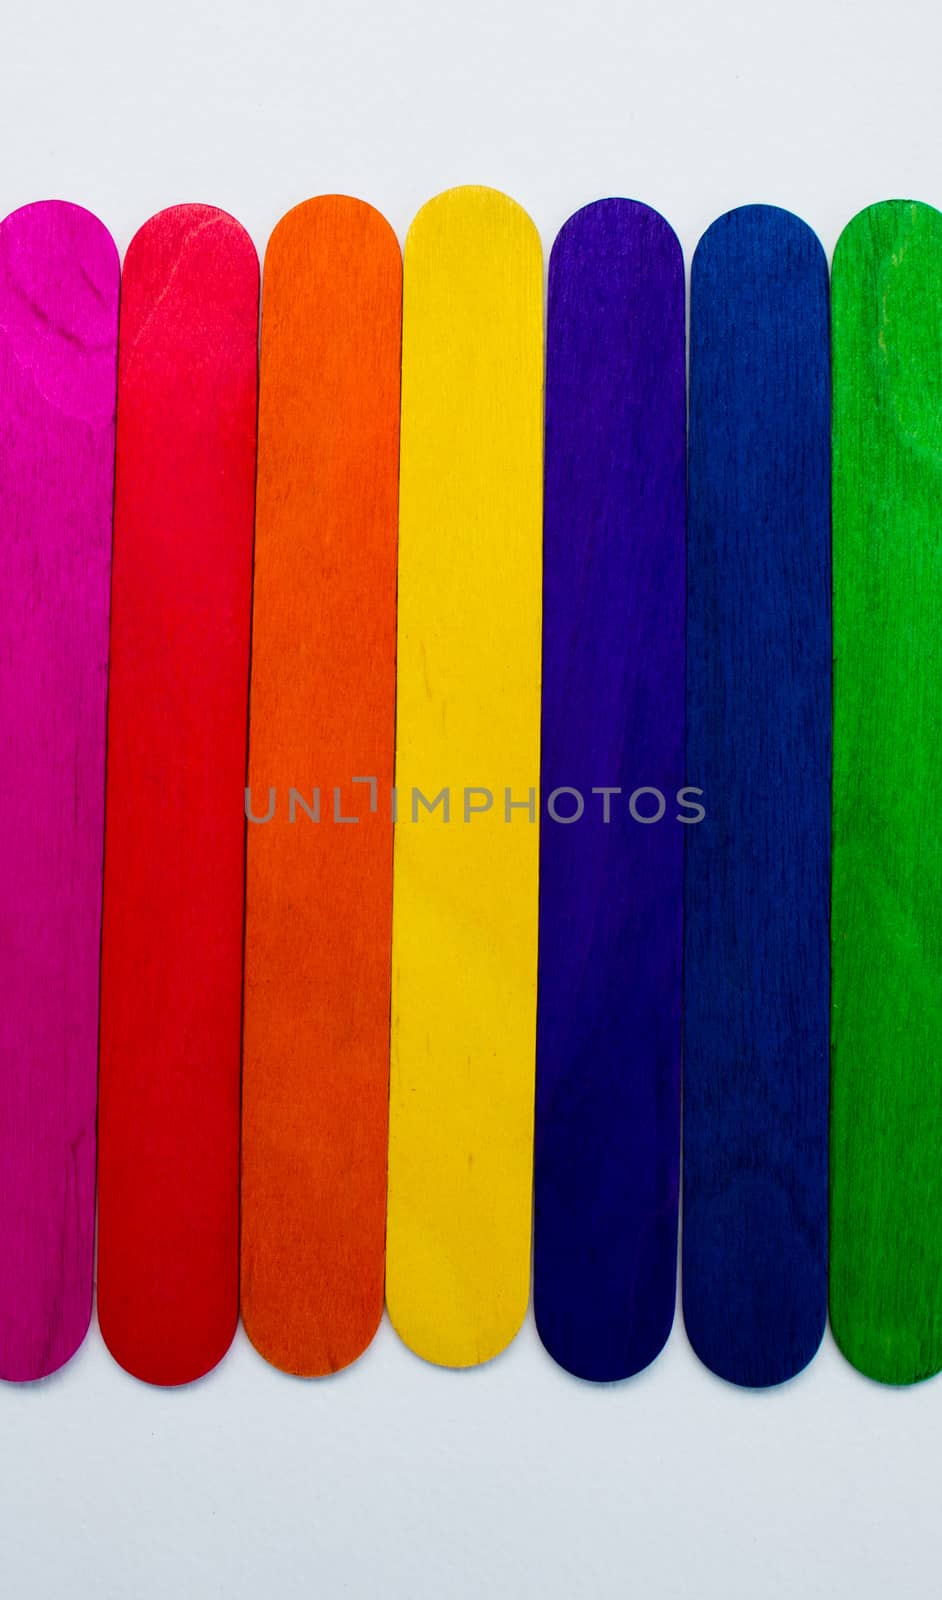 Colorful wooden white background.